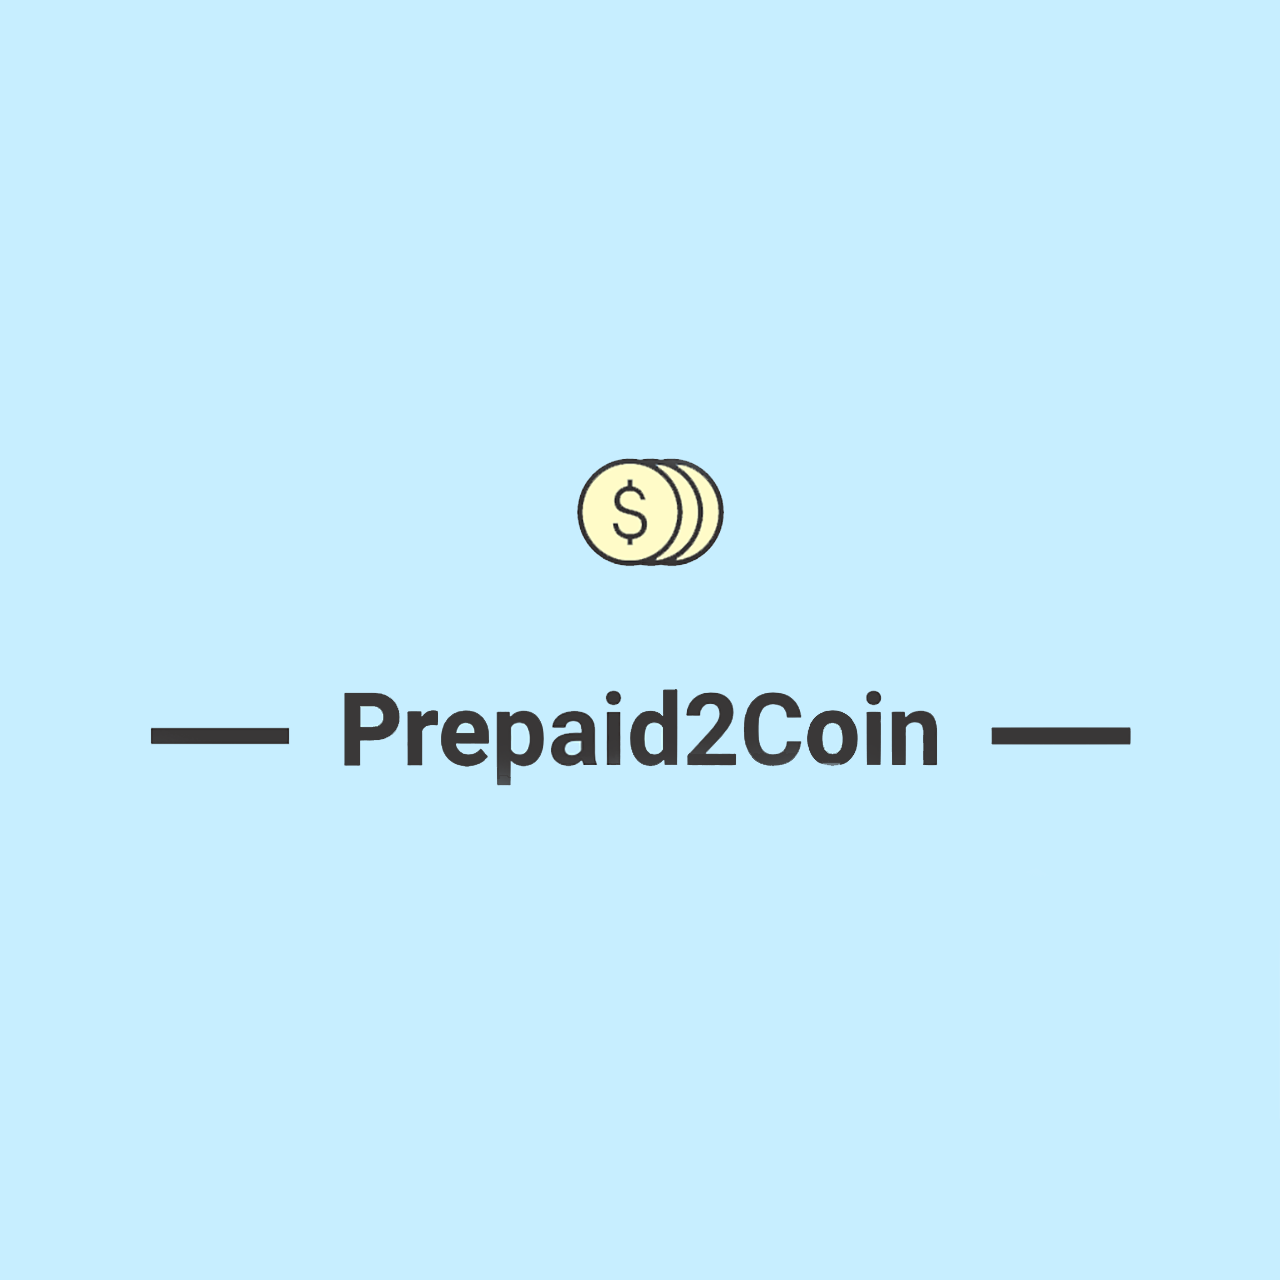 Prepaid2Coin LLC Launches Closed Beta Helping Pave The Way For The Future Of Financial Literacy